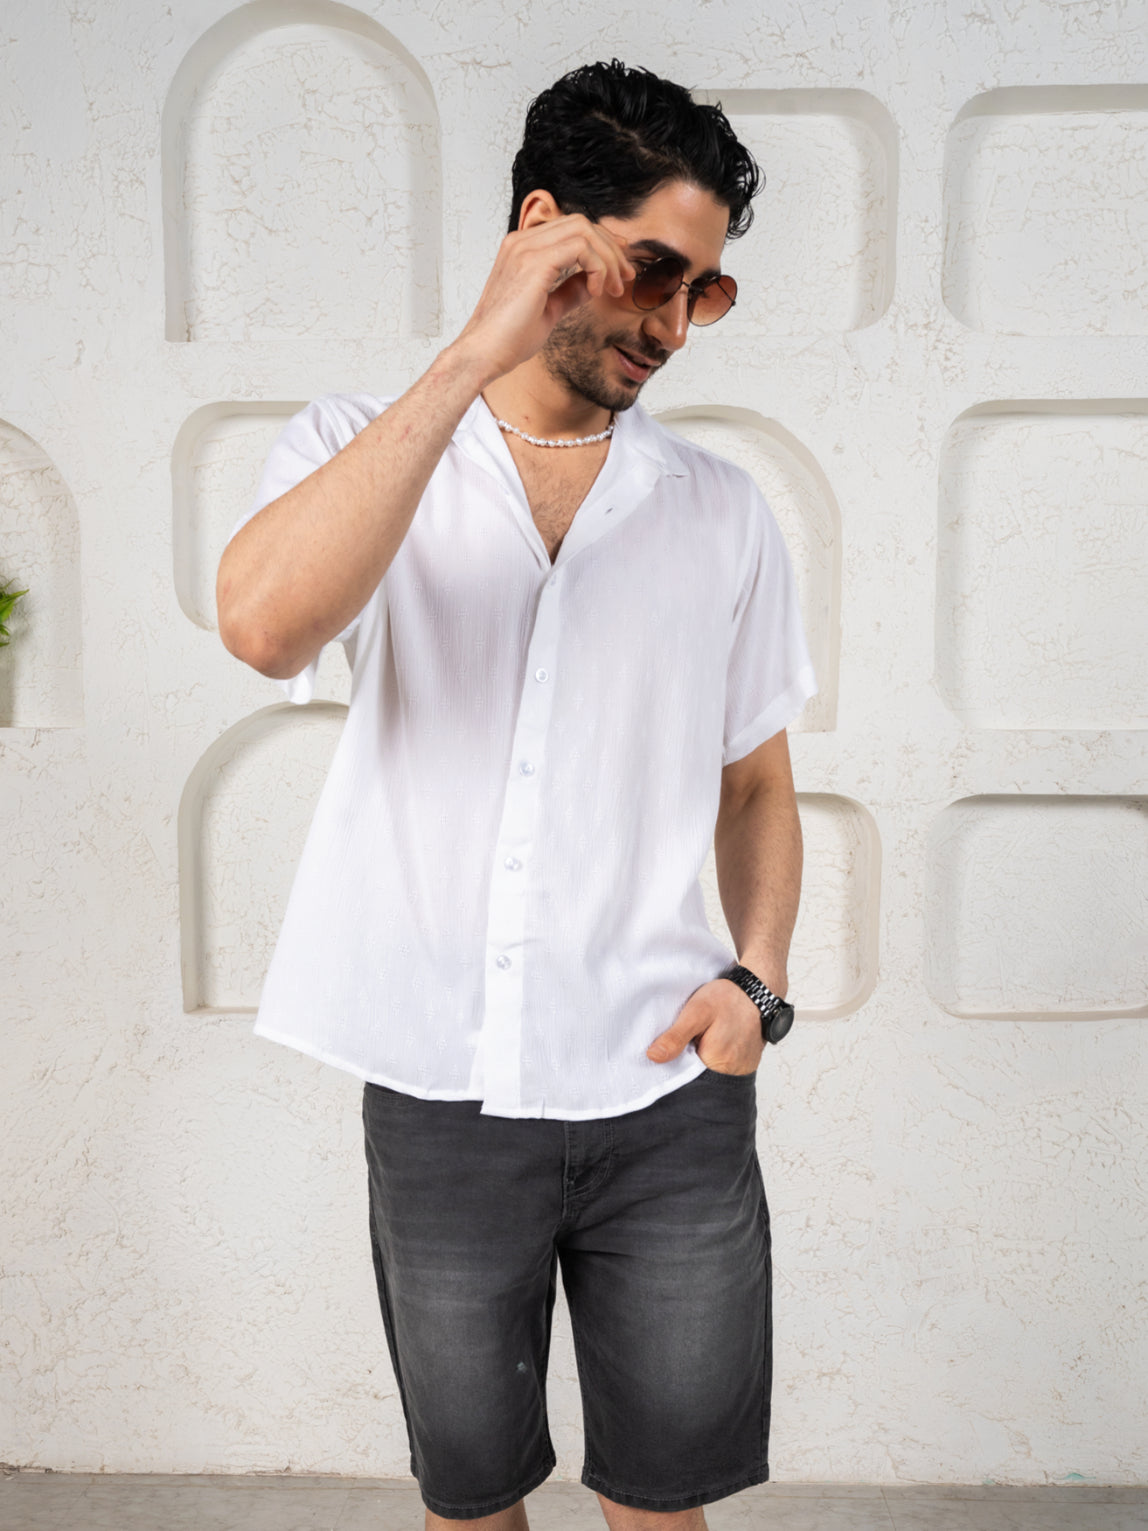 Firangi Yarn Relaxed Fit Solid Self Design Super Flowy Re-engineered Cotton- Half Sleeves Party Shirt Super White